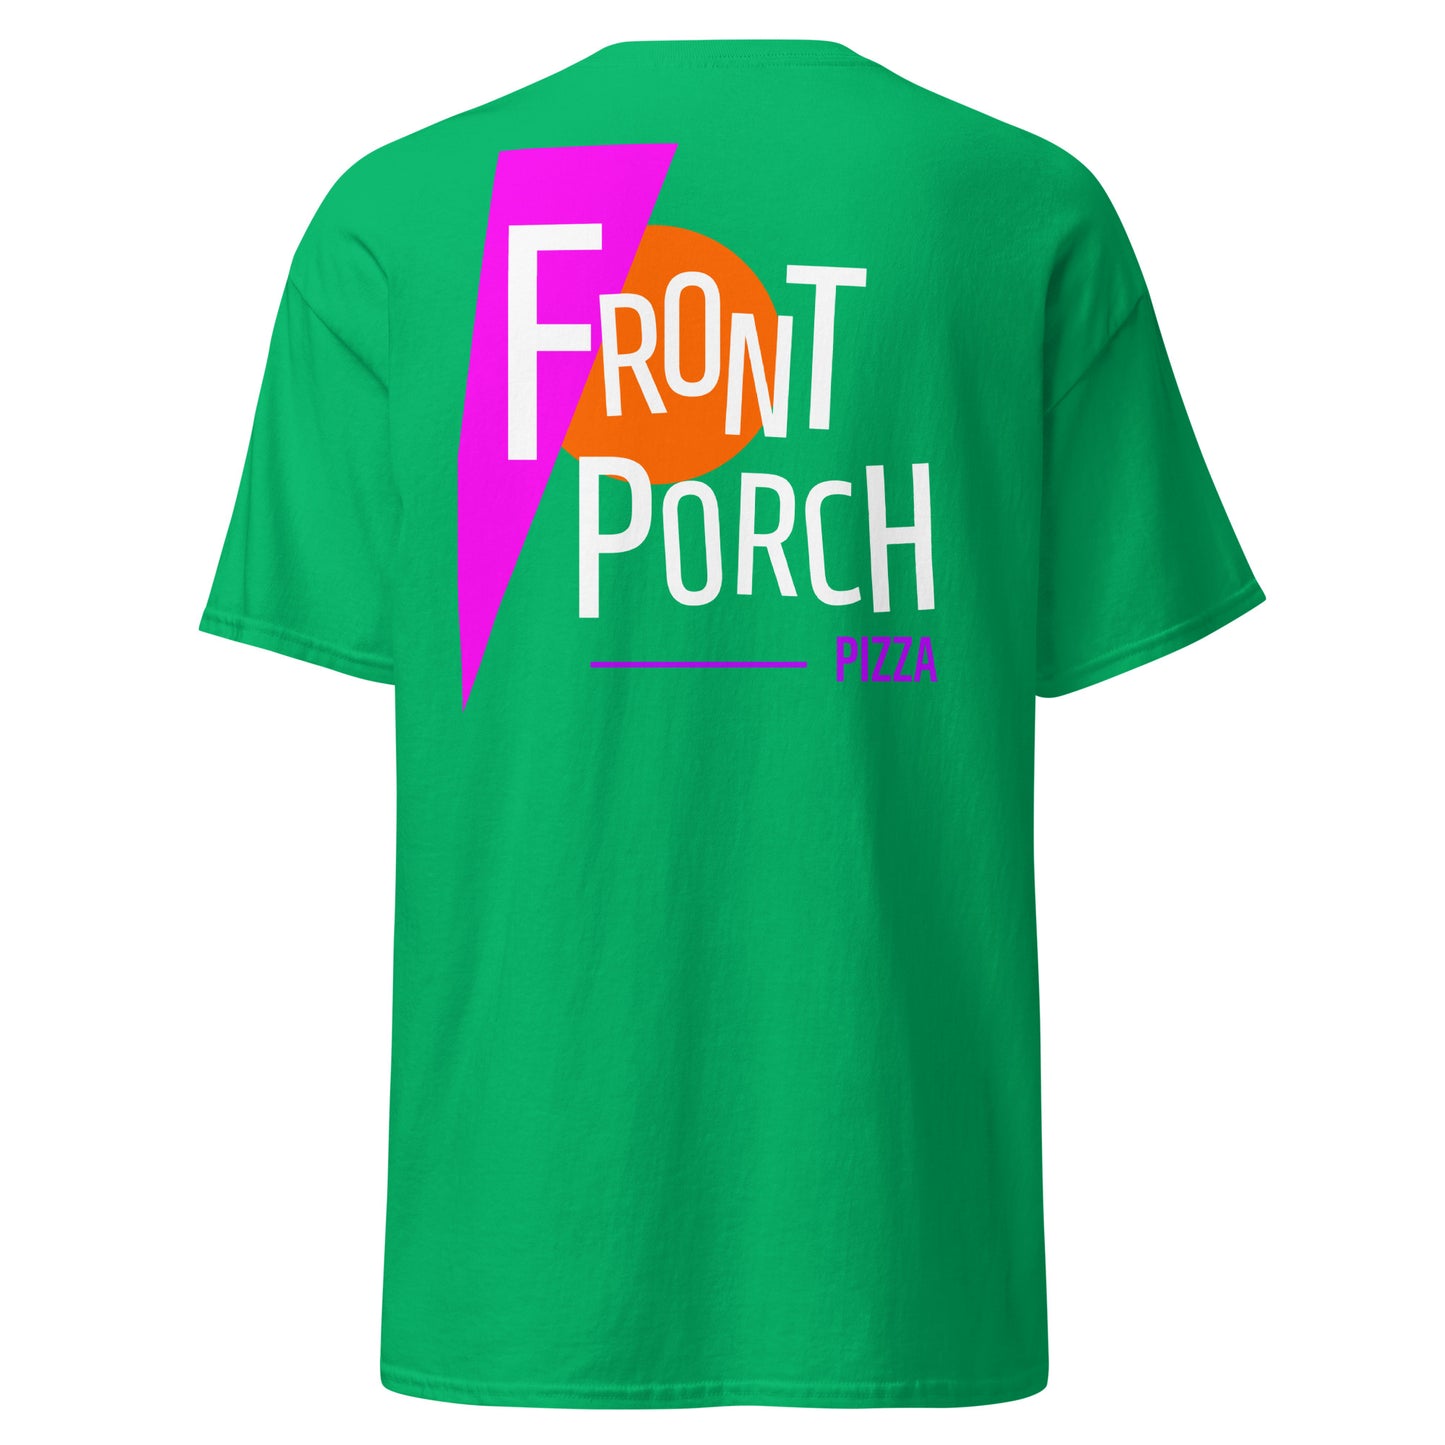 The 'OG' Front Porch Pizza Classic Tee